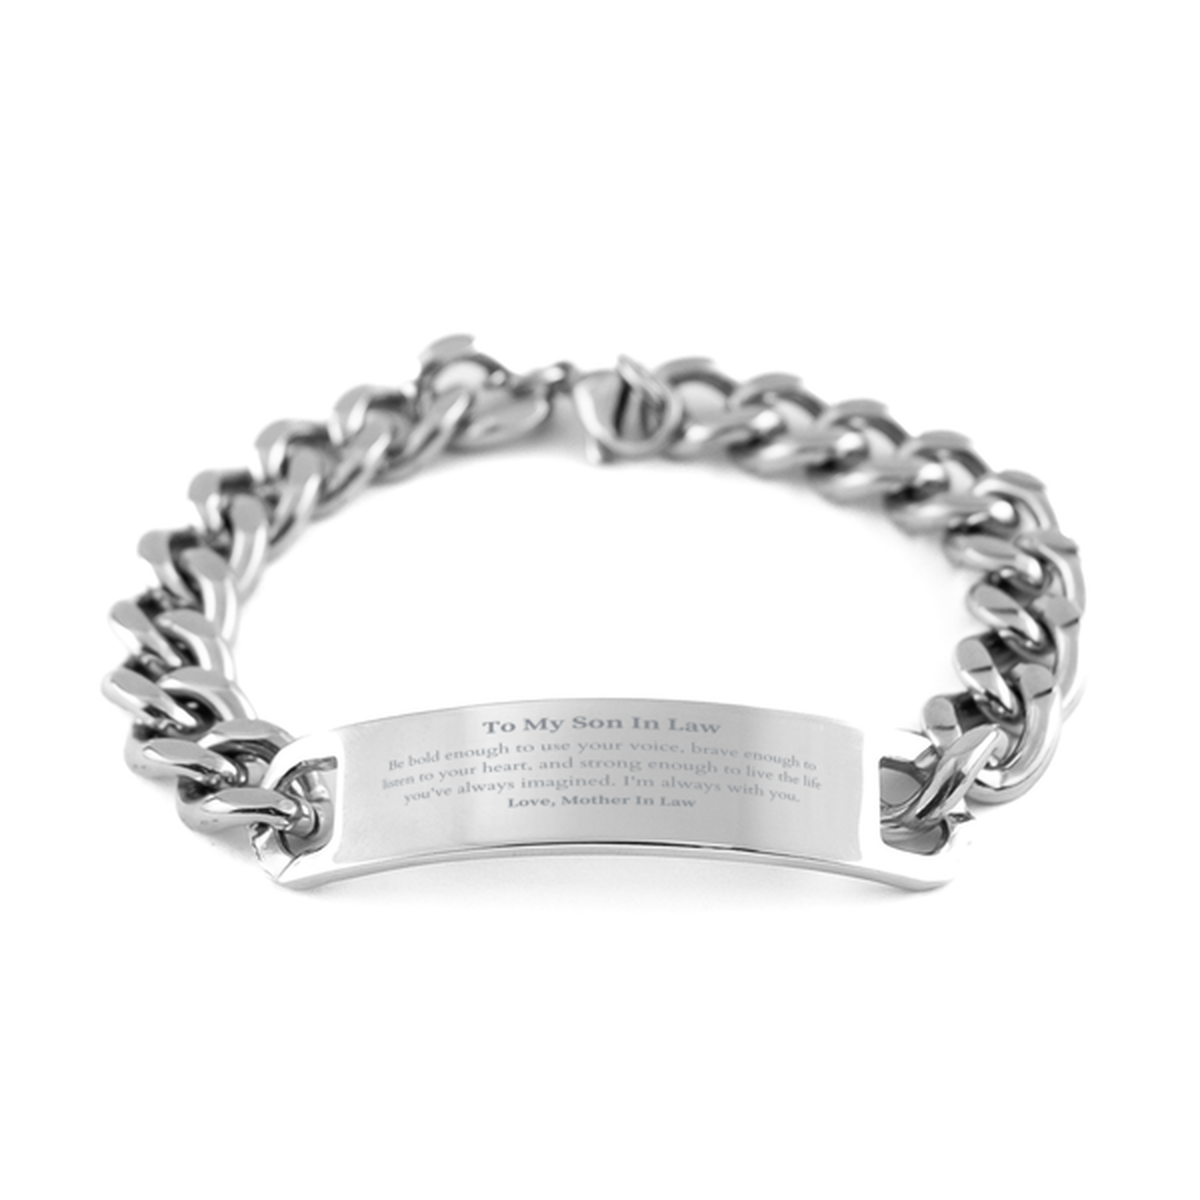 Keepsake Son In Law Cuban Chain Stainless Steel Bracelet Gift Idea Graduation Christmas Birthday Son In Law from Mother In Law, Son In Law Be bold enough to use your voice, brave enough to listen to your heart. Love, Mother In Law